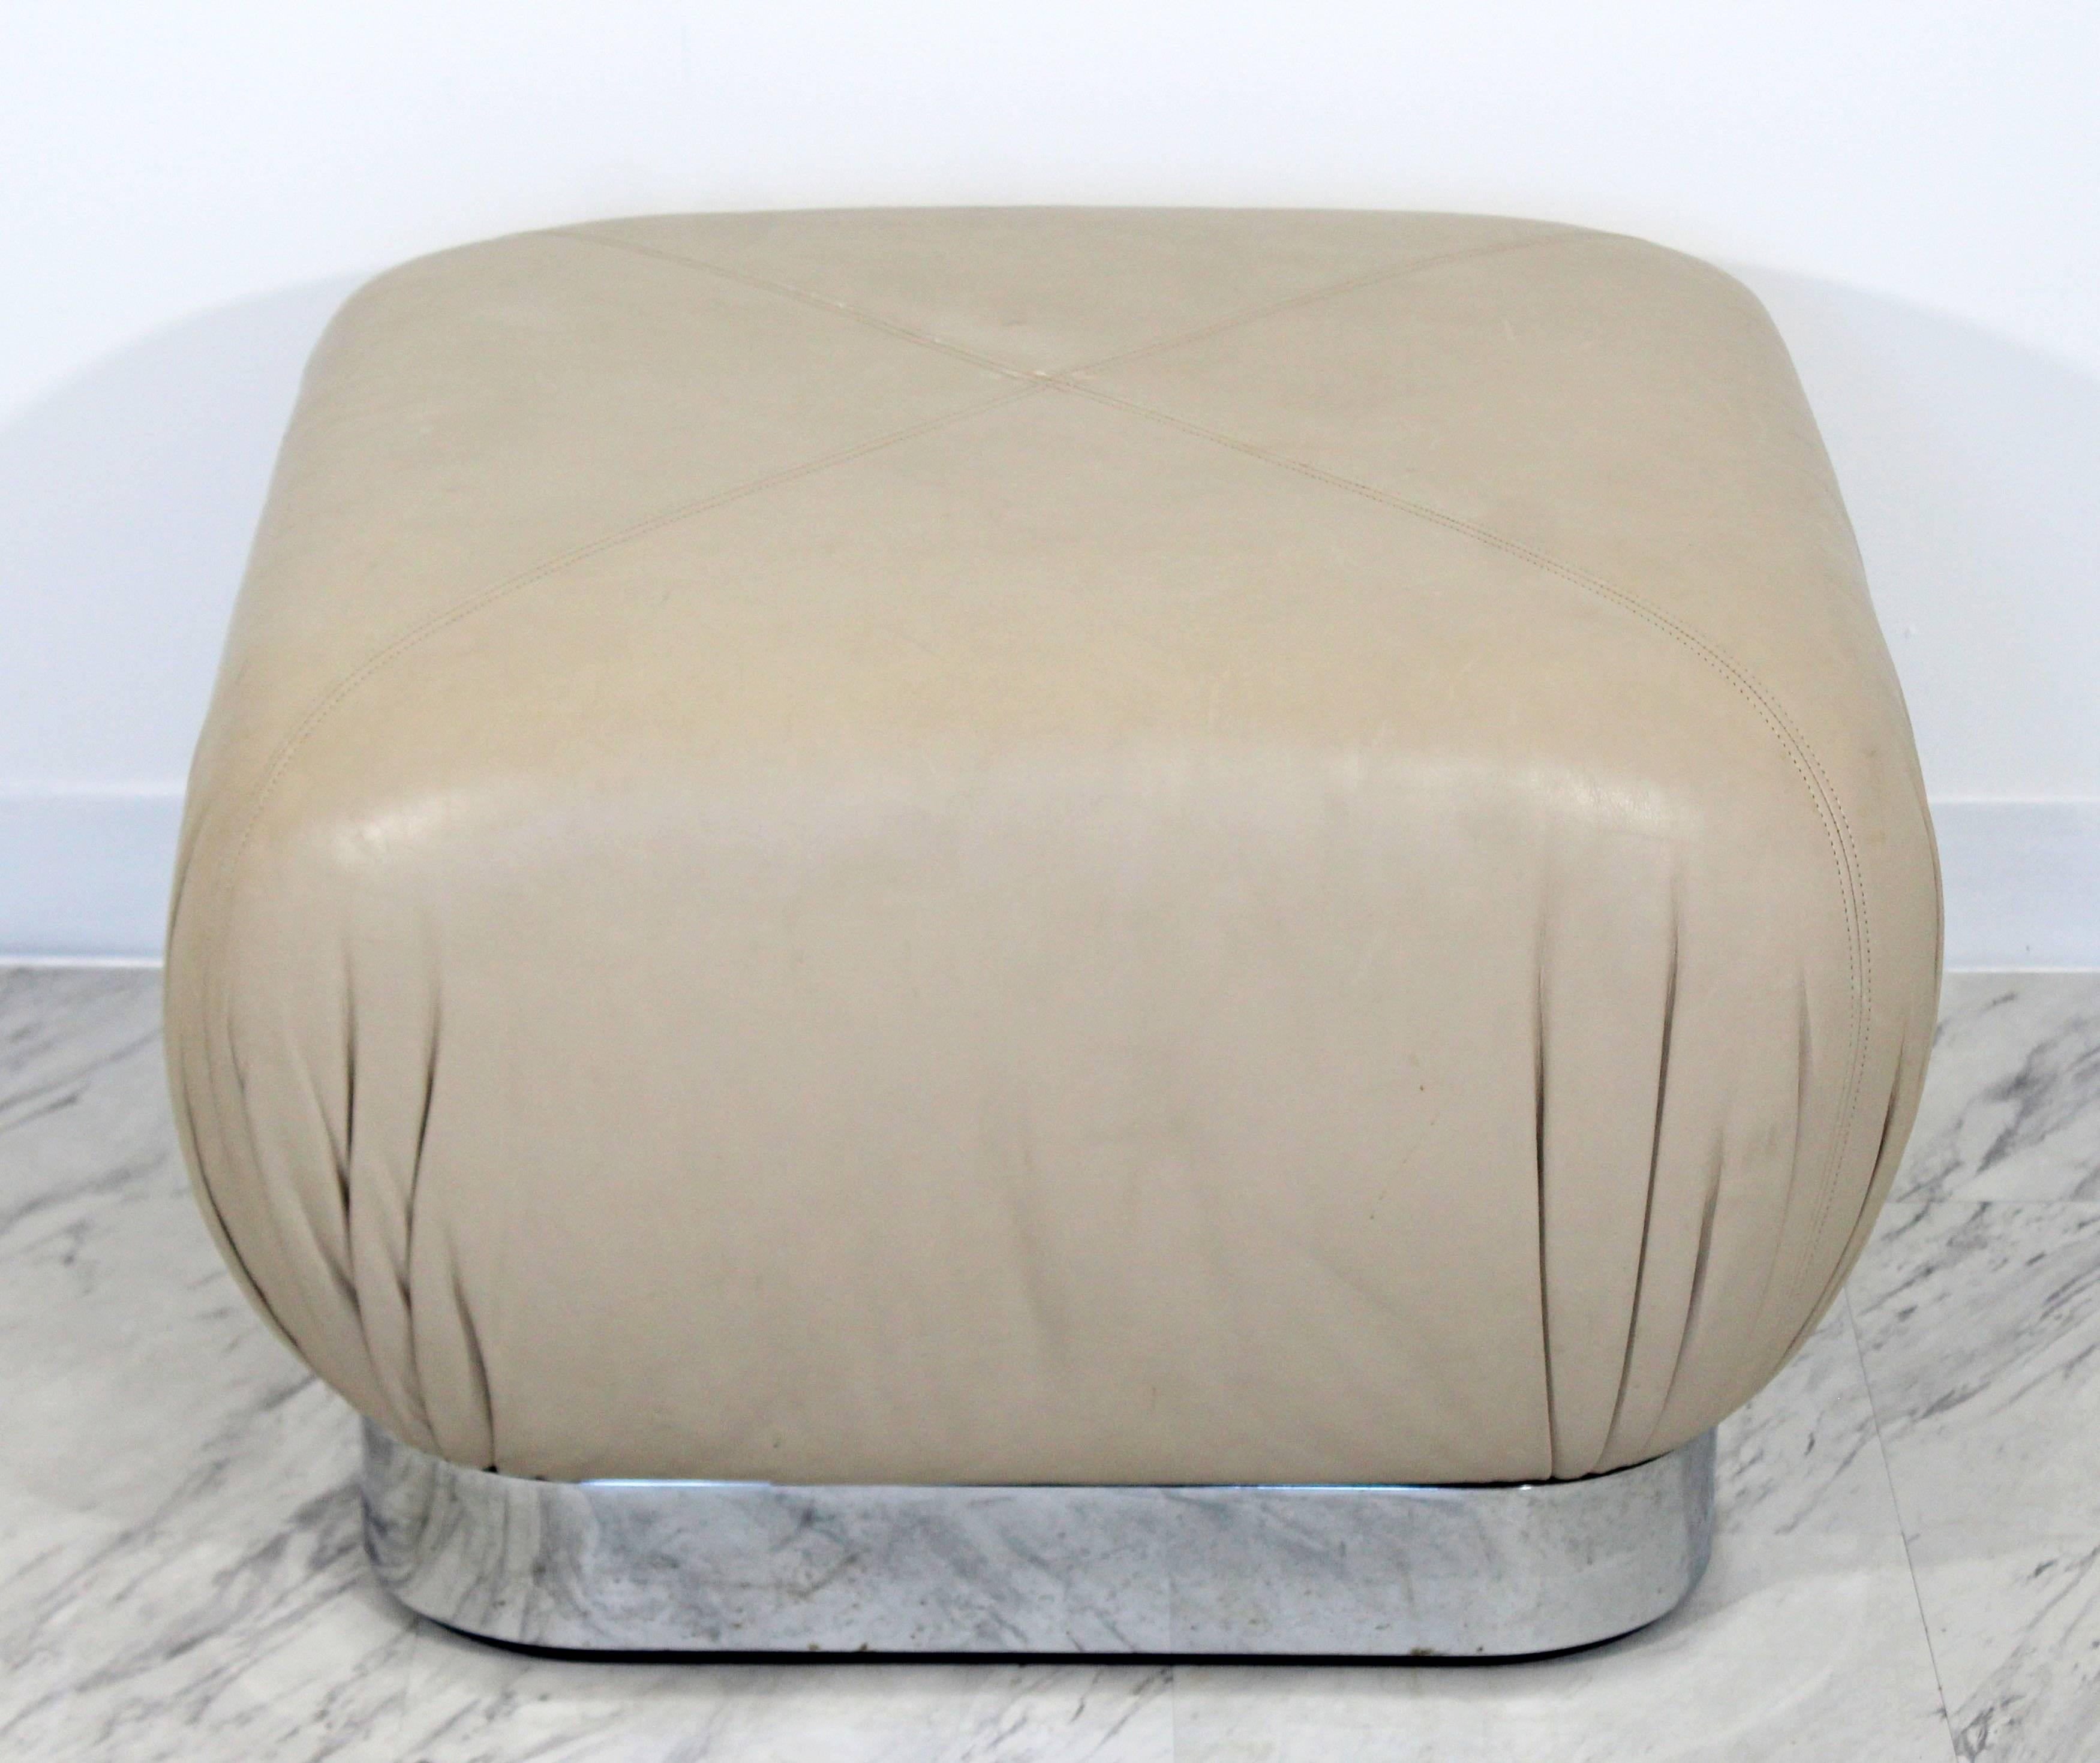 For your consideration is a gorgeous, beige leather and chrome ottoman, on wheels, by Preview Furniture, circa the 1970s, in the style of Karl Springer. In excellent condition. The dimensions are 24